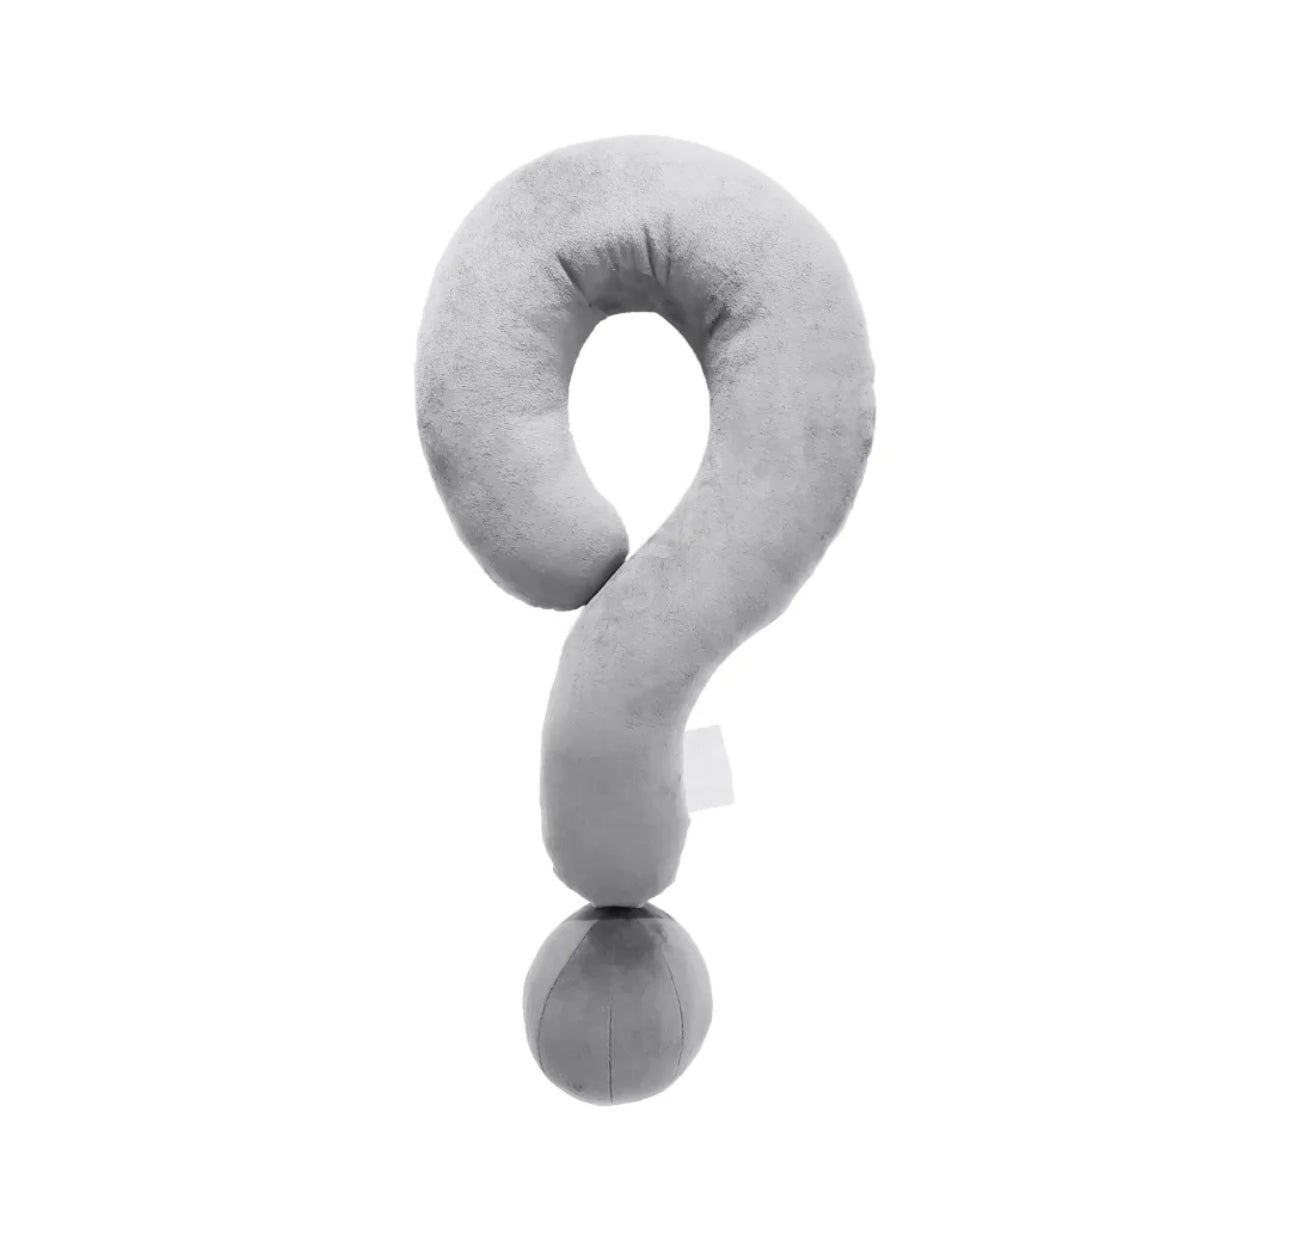 Designer Brand 3me - ❓Question Mark Travel Neck Pillow-Portable Question Mark Travel Pillow Memory Foam Travel Neck Pillows Ergonomic Neck Support Cushion for Sleeping Rest on Airplane Car Train and at Office and Home Use, Purple